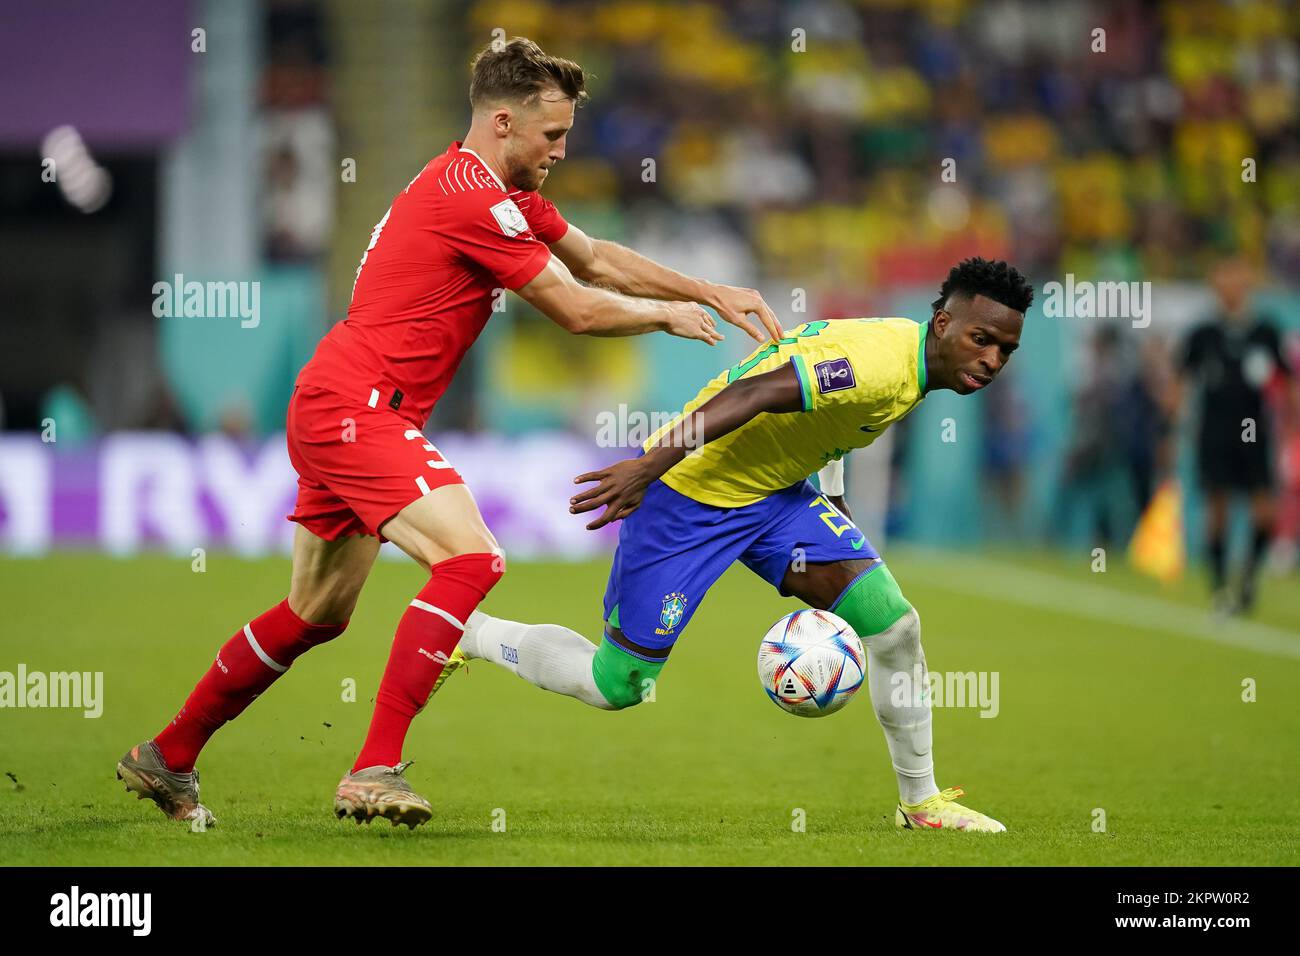 DOHA, QATAR - NOVEMBER 28: Player of Brazil Vinícius Júnior fights for the ball with player of Switzerland Silvan Widmer during the FIFA World Cup Qatar 2022 group G match between Brazil and Switzerland at Stadium 974 on November 28, 2022 in Doha, Qatar. (Photo by Florencia Tan Jun/PxImages) Stock Photo